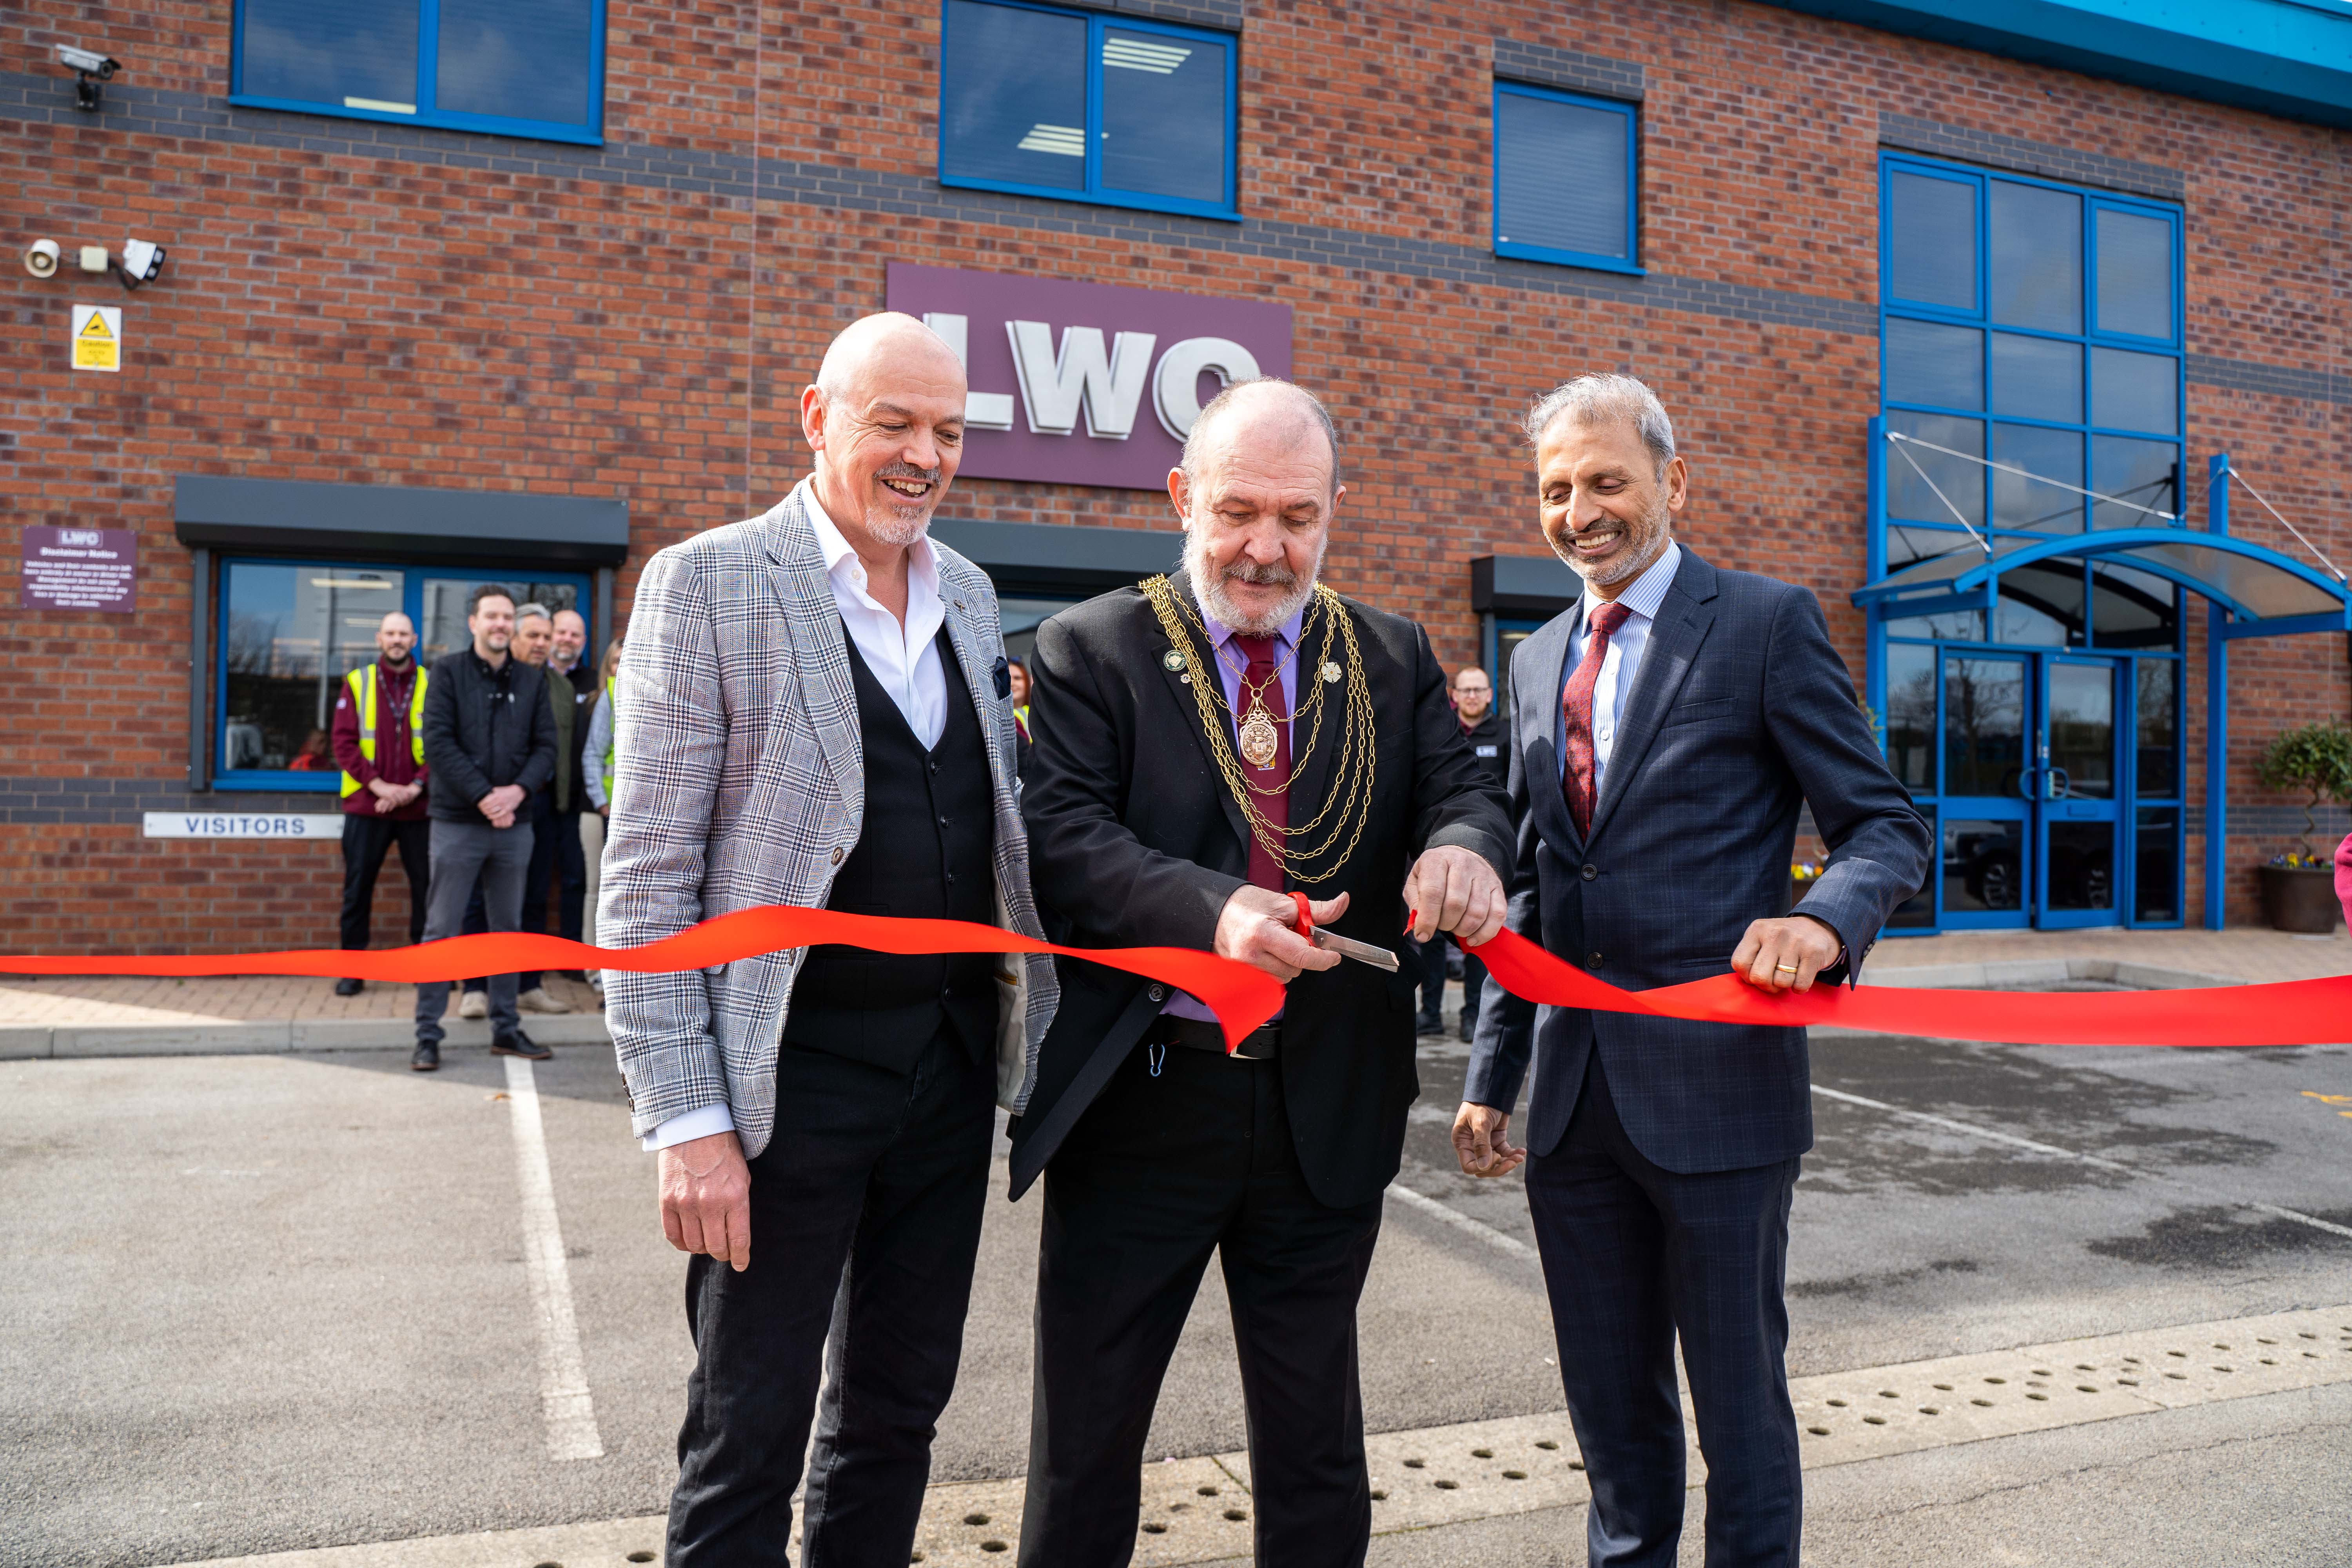 Doncaster’s Civic Mayor Opens New £7m Drinks Distribution Centre